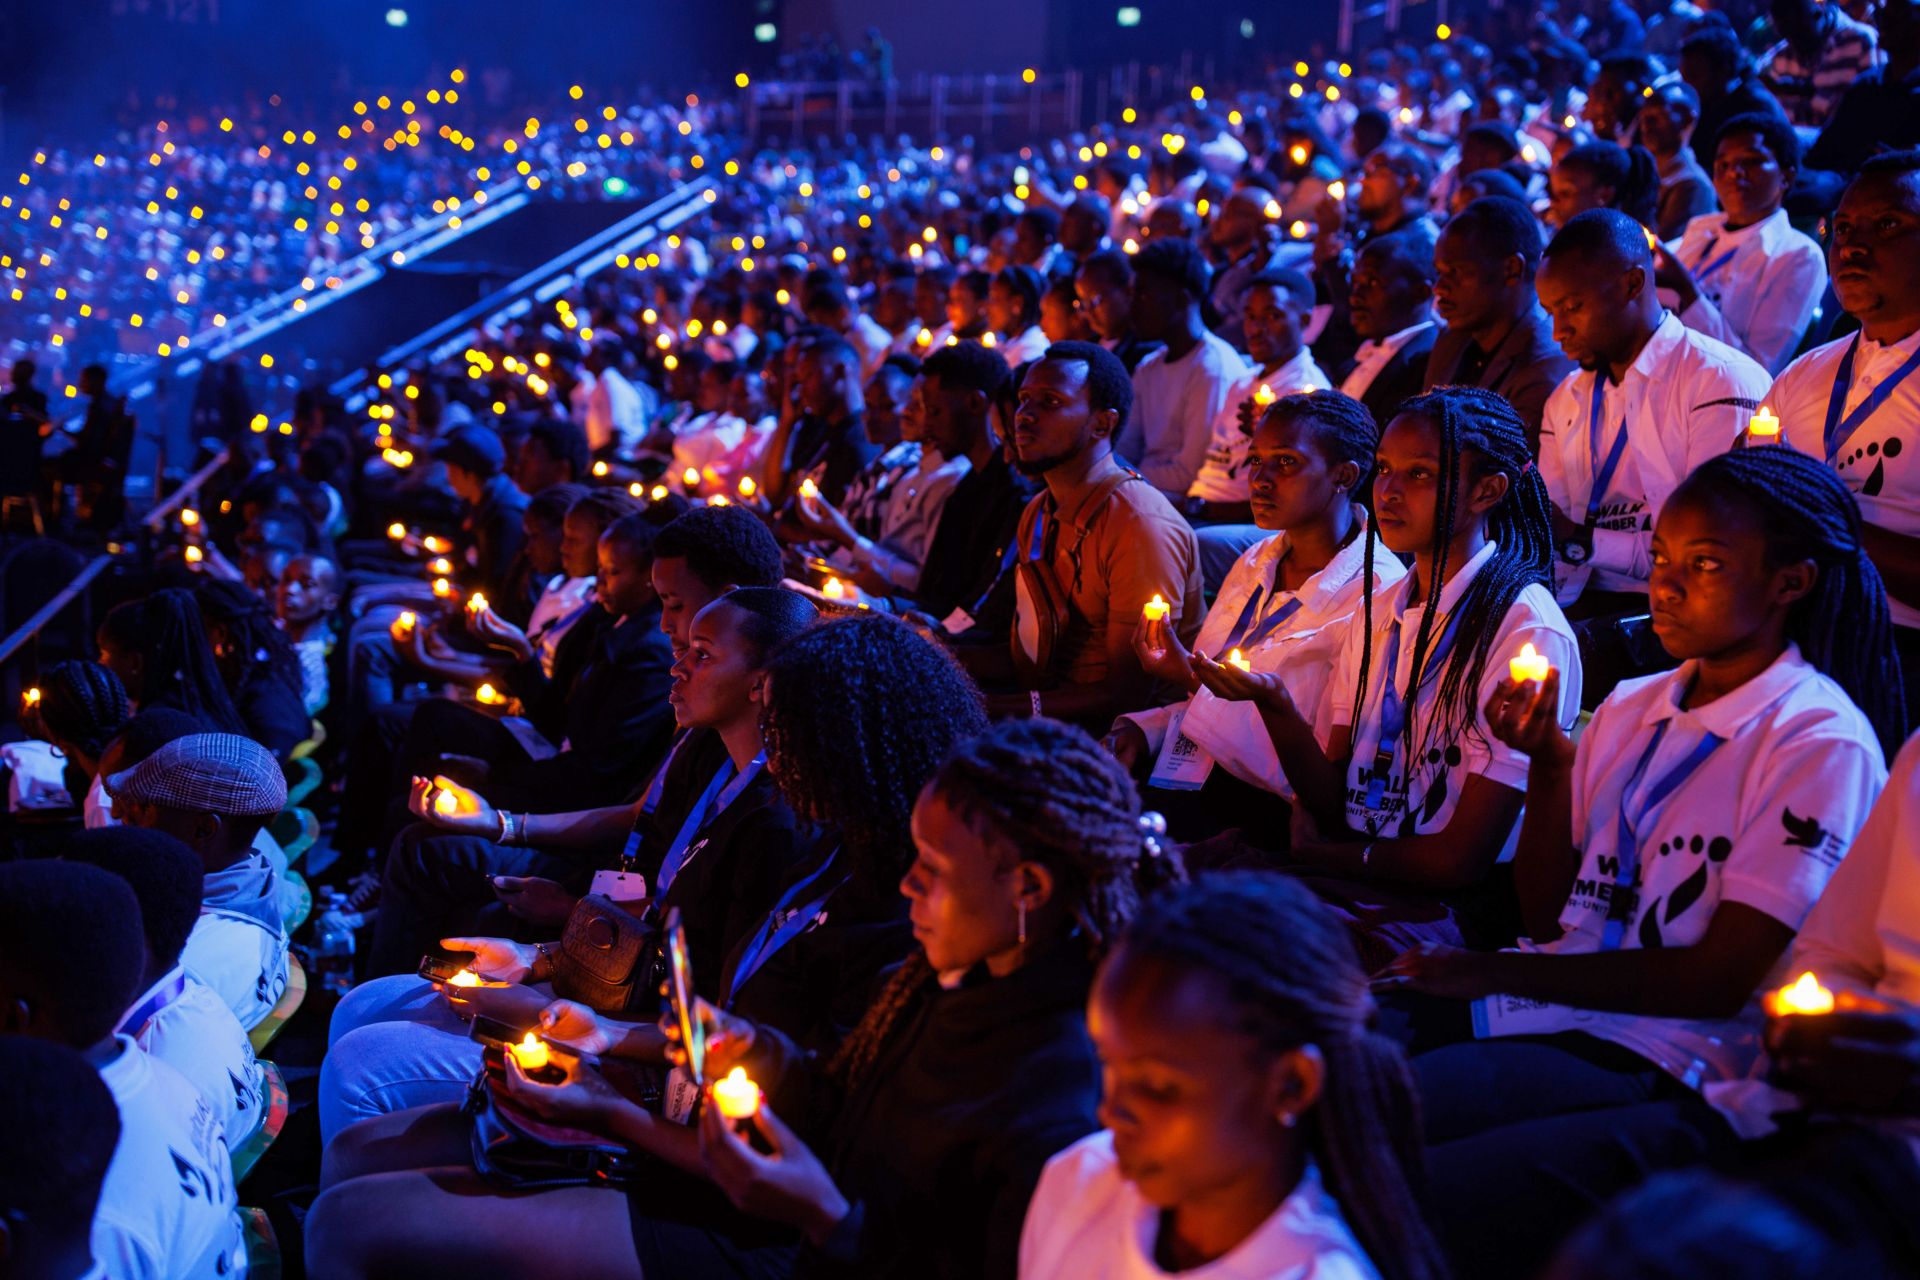 Rwanda’s Younger Generation Still Deals With the Legacy of Genocide